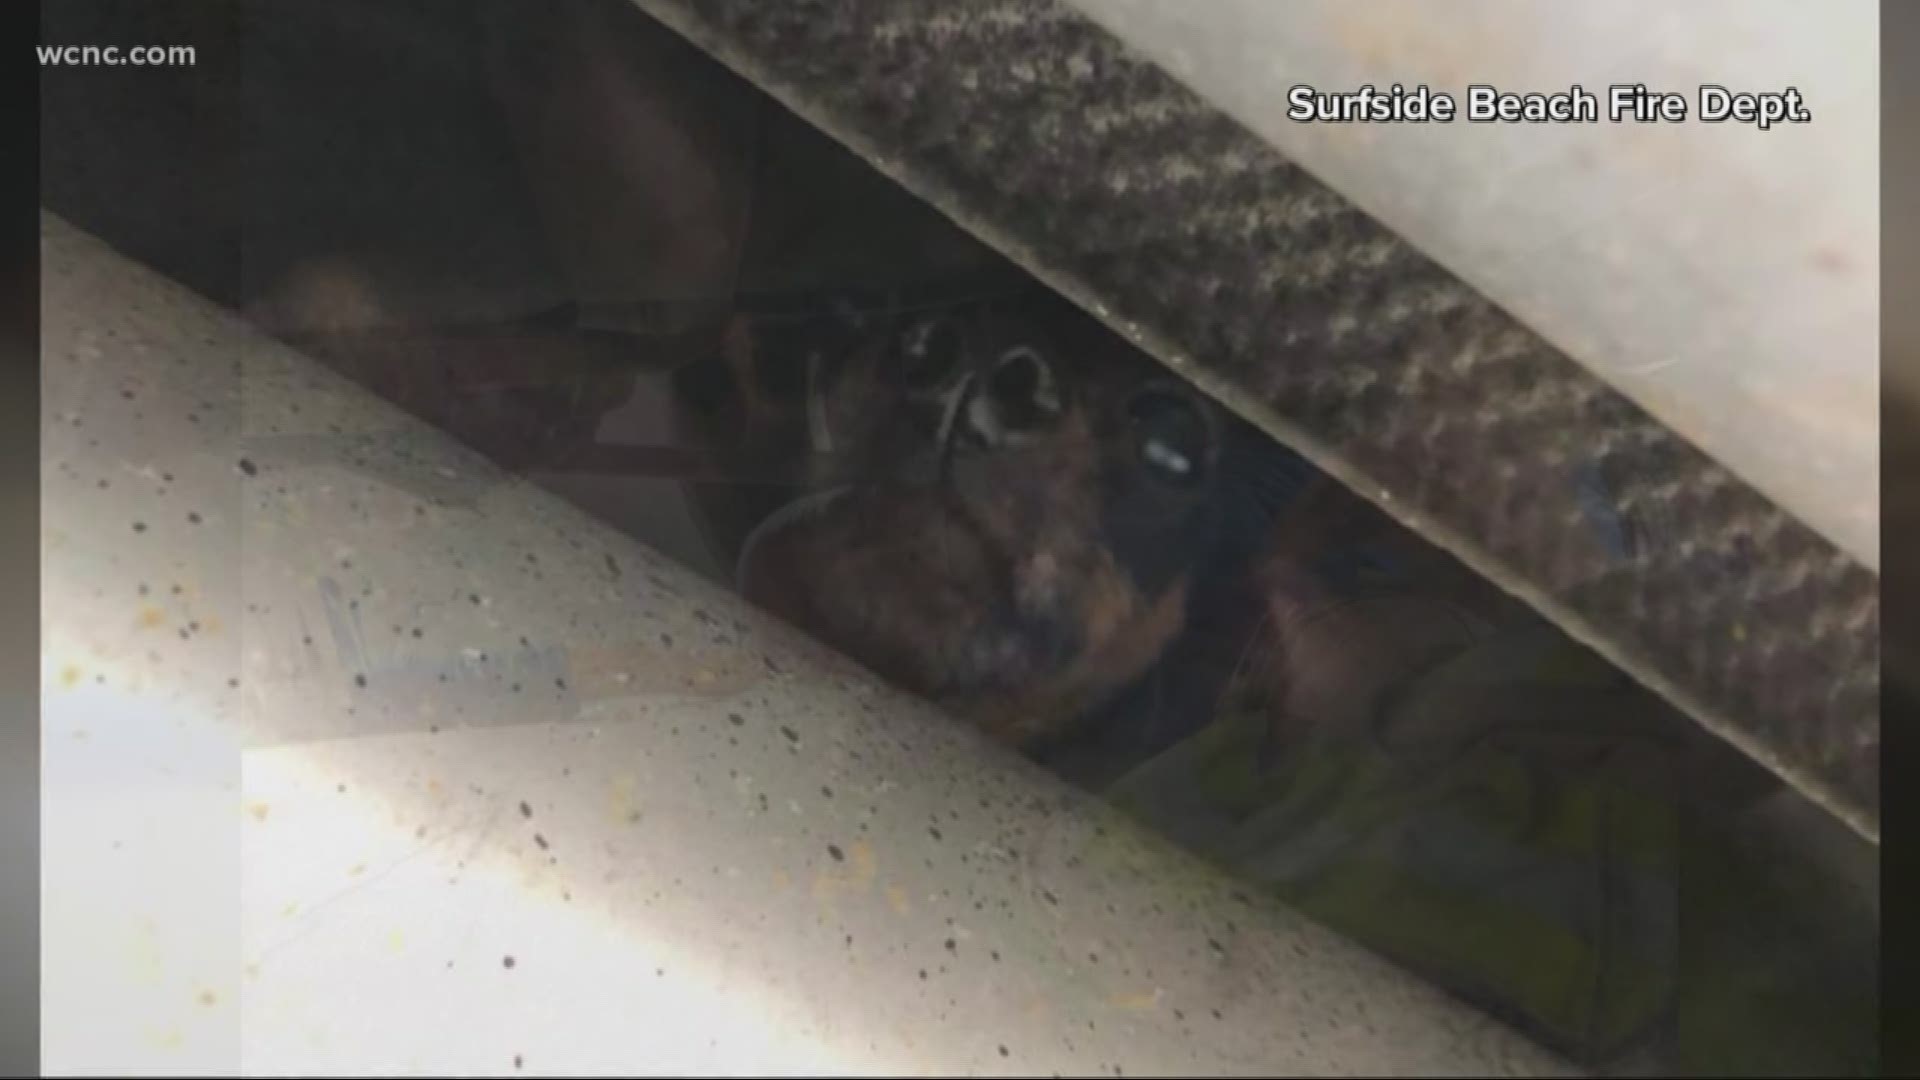 A South Carolina fire official is receiving praise after he saved a dog trapped under a car.